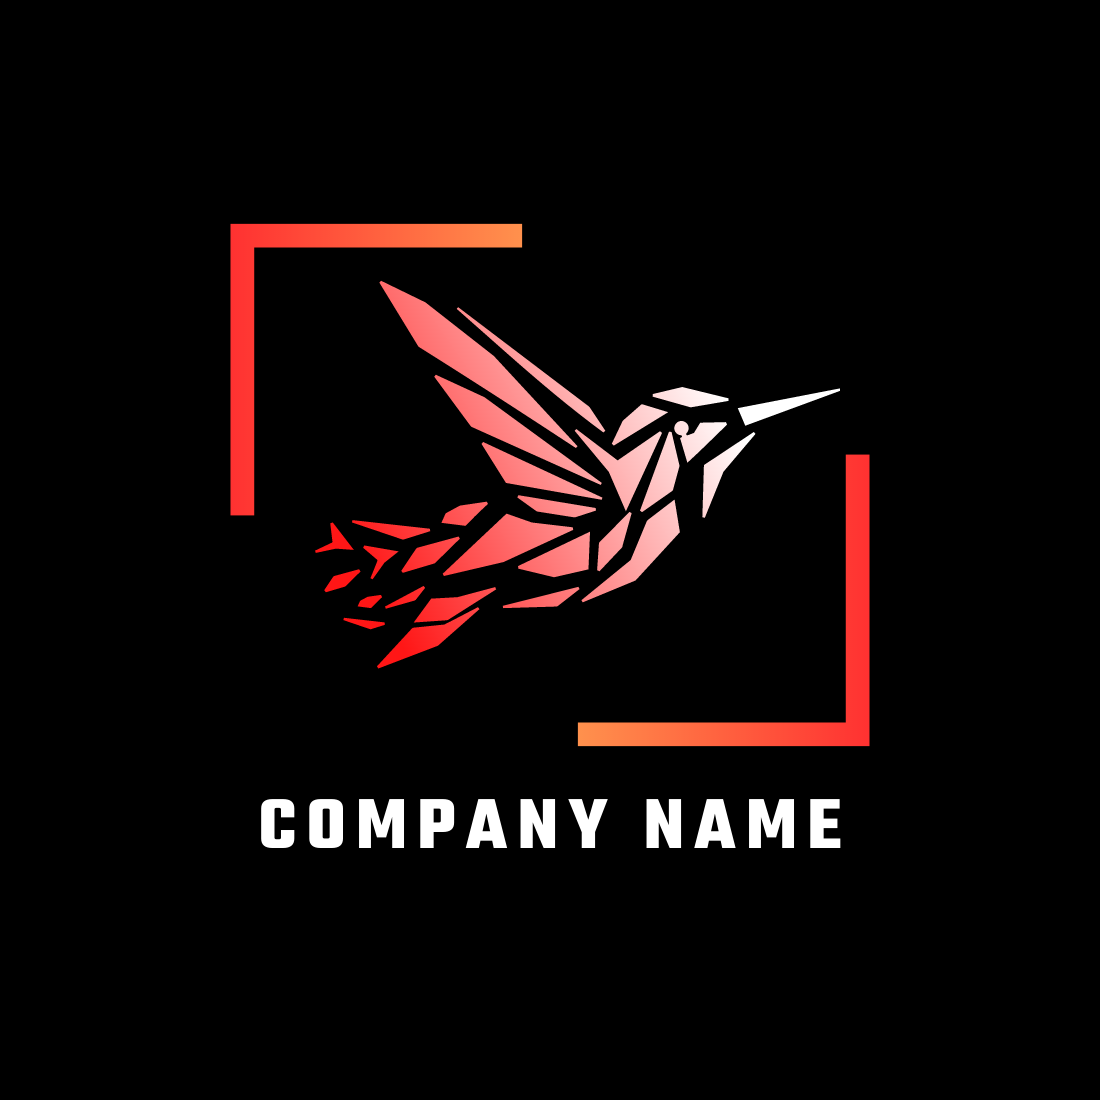 Humming Bird logo for any digital company preview image.